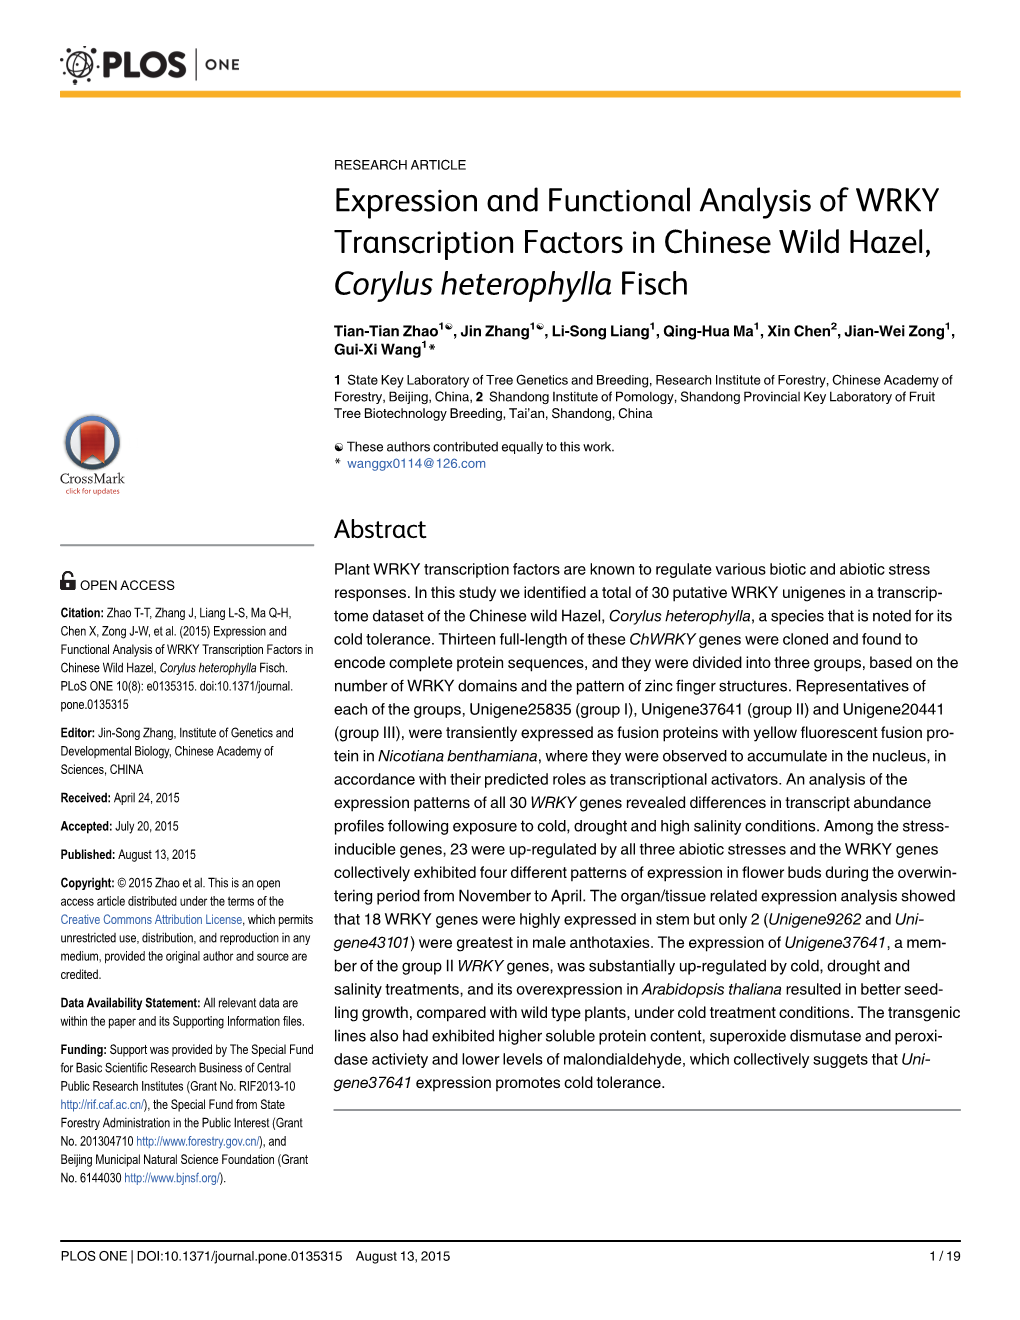 Expression and Functional Analysis of WRKY Transcription Factors in Chinese Wild Hazel, Corylus Heterophylla Fisch